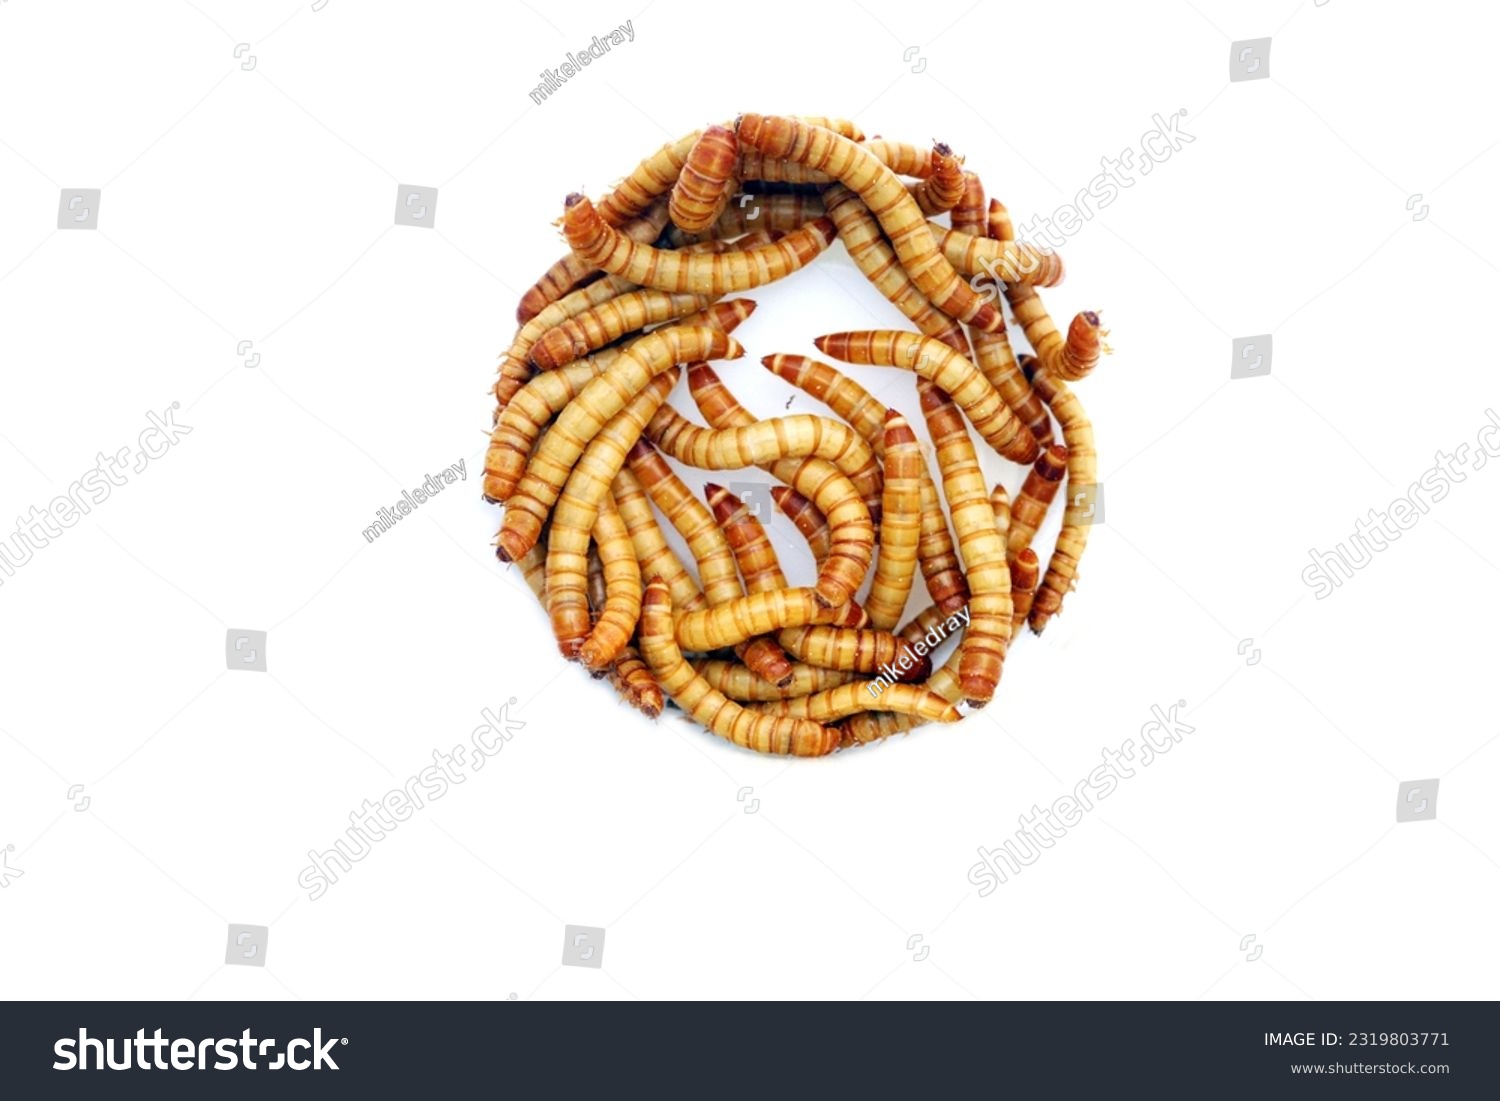 Mealworms are the larval form of the mealworm beetle. Tenebrio Molitor a species of darkling beetle. Mealworms are used for food for pets or as bait by fishermen. Mealworms are edible for humans.  #2319803771